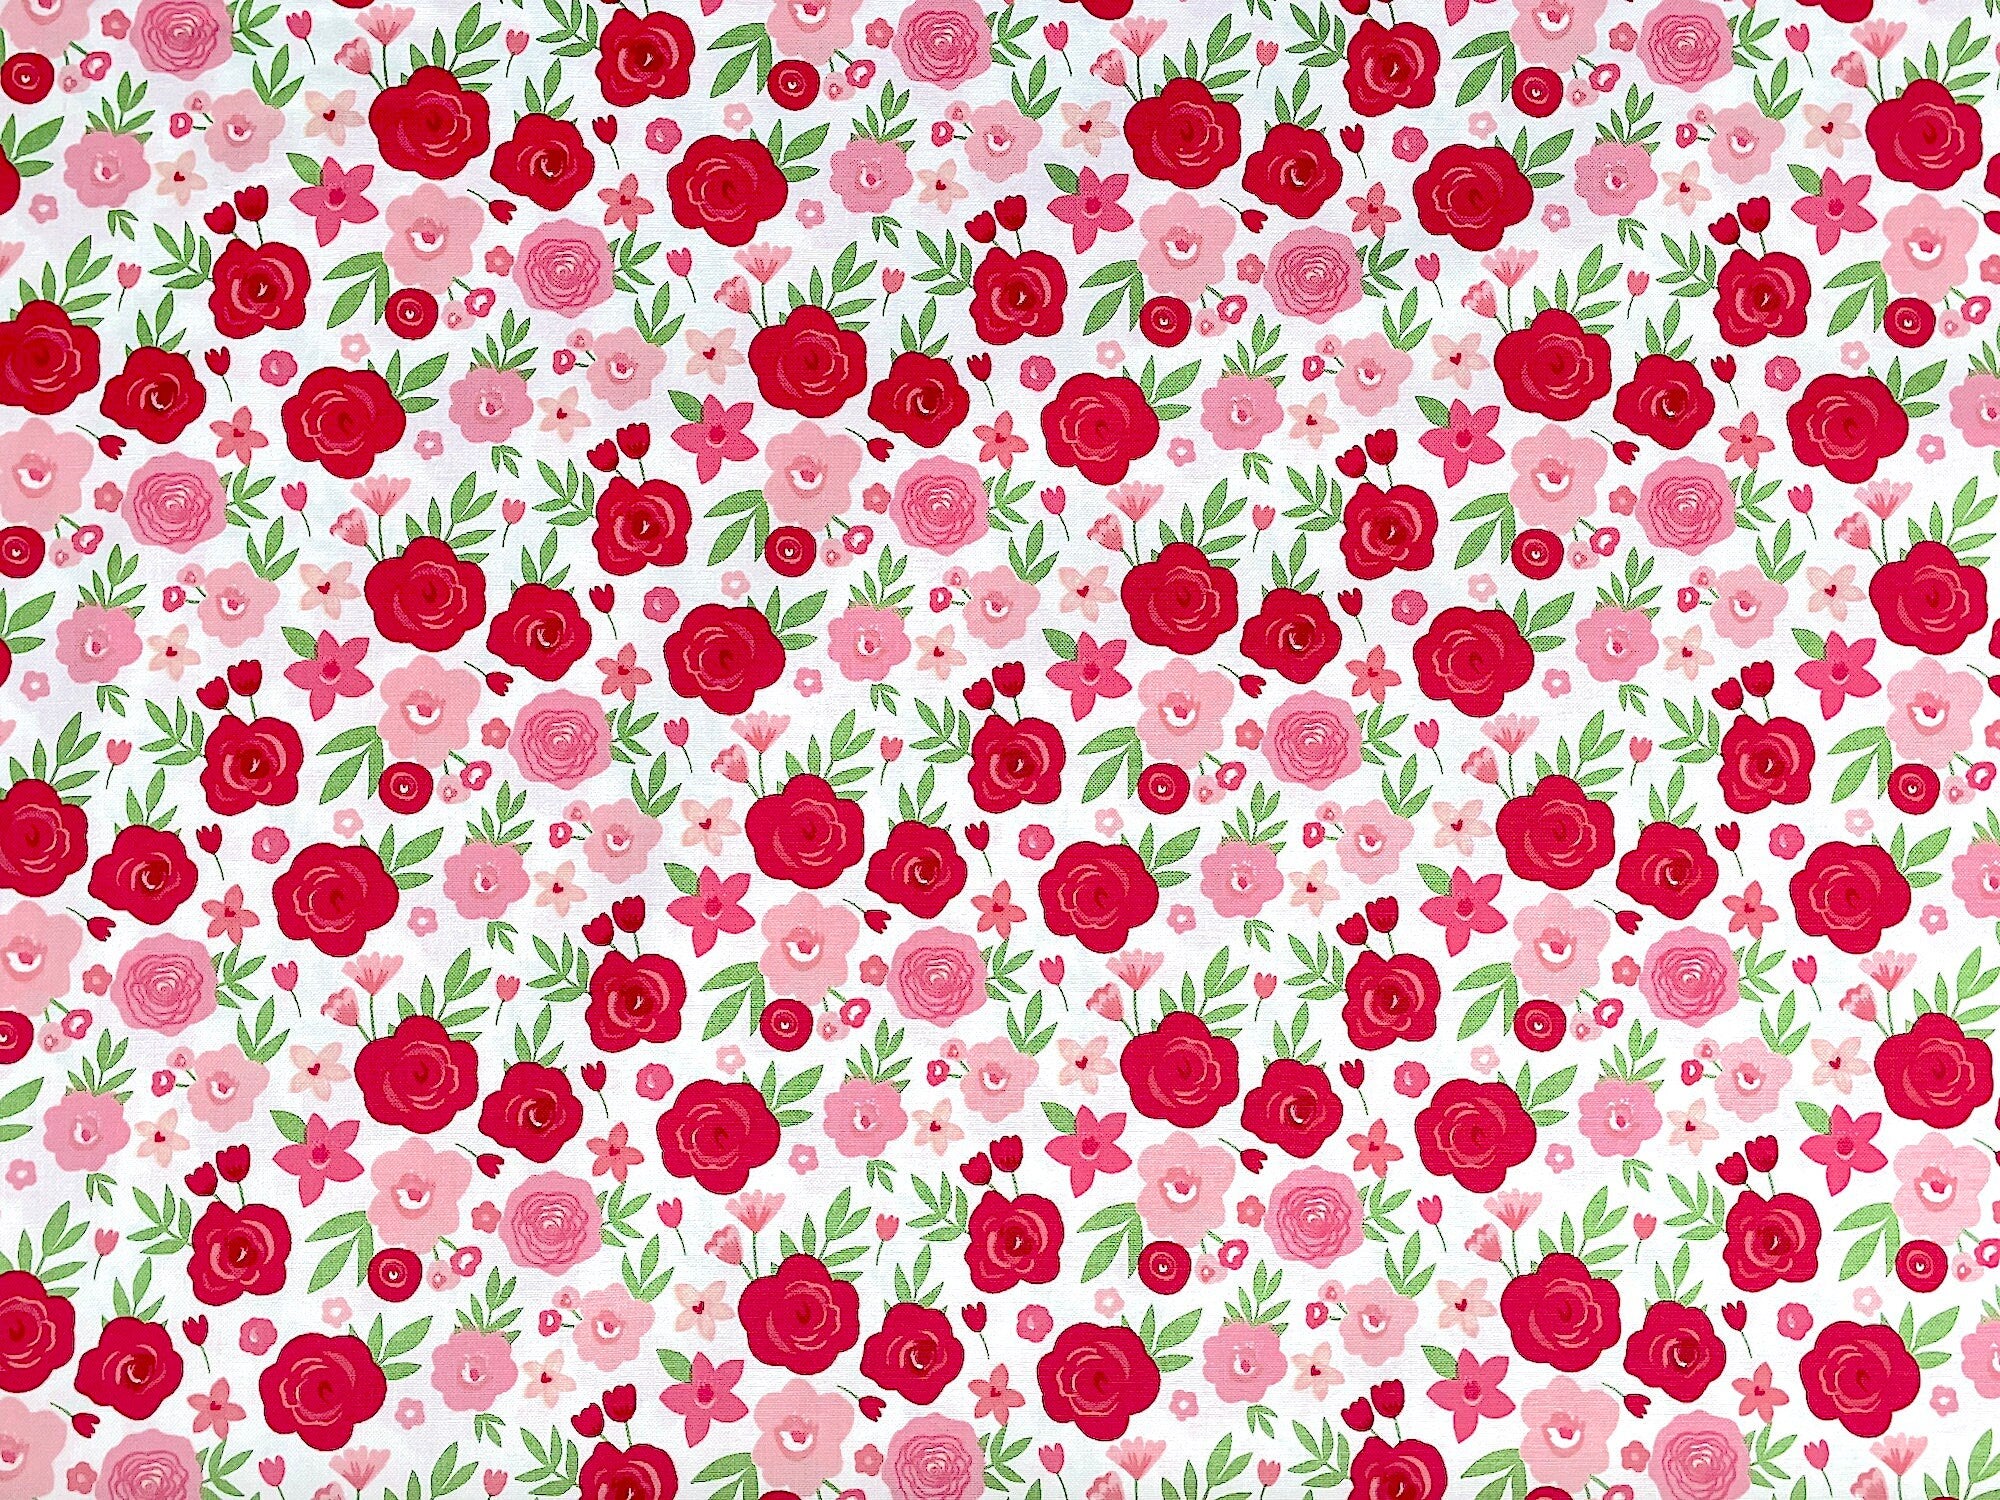 This fabric is covered with pink and red flowers on a white background.